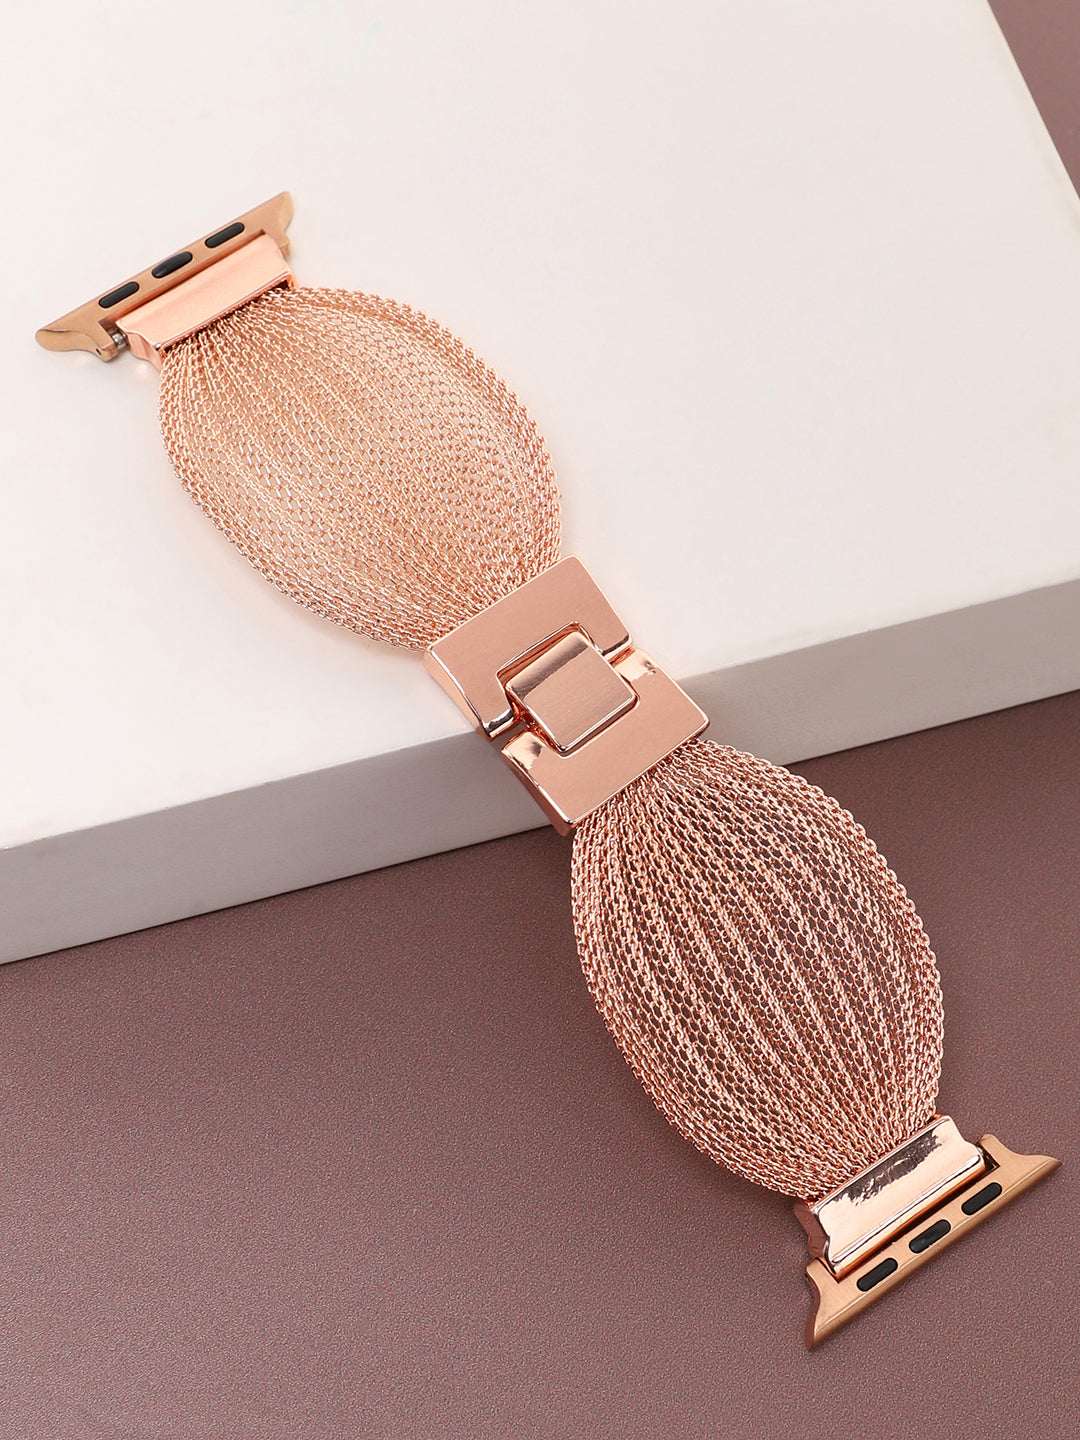 Rose Gold Solid Apple Watch Straps